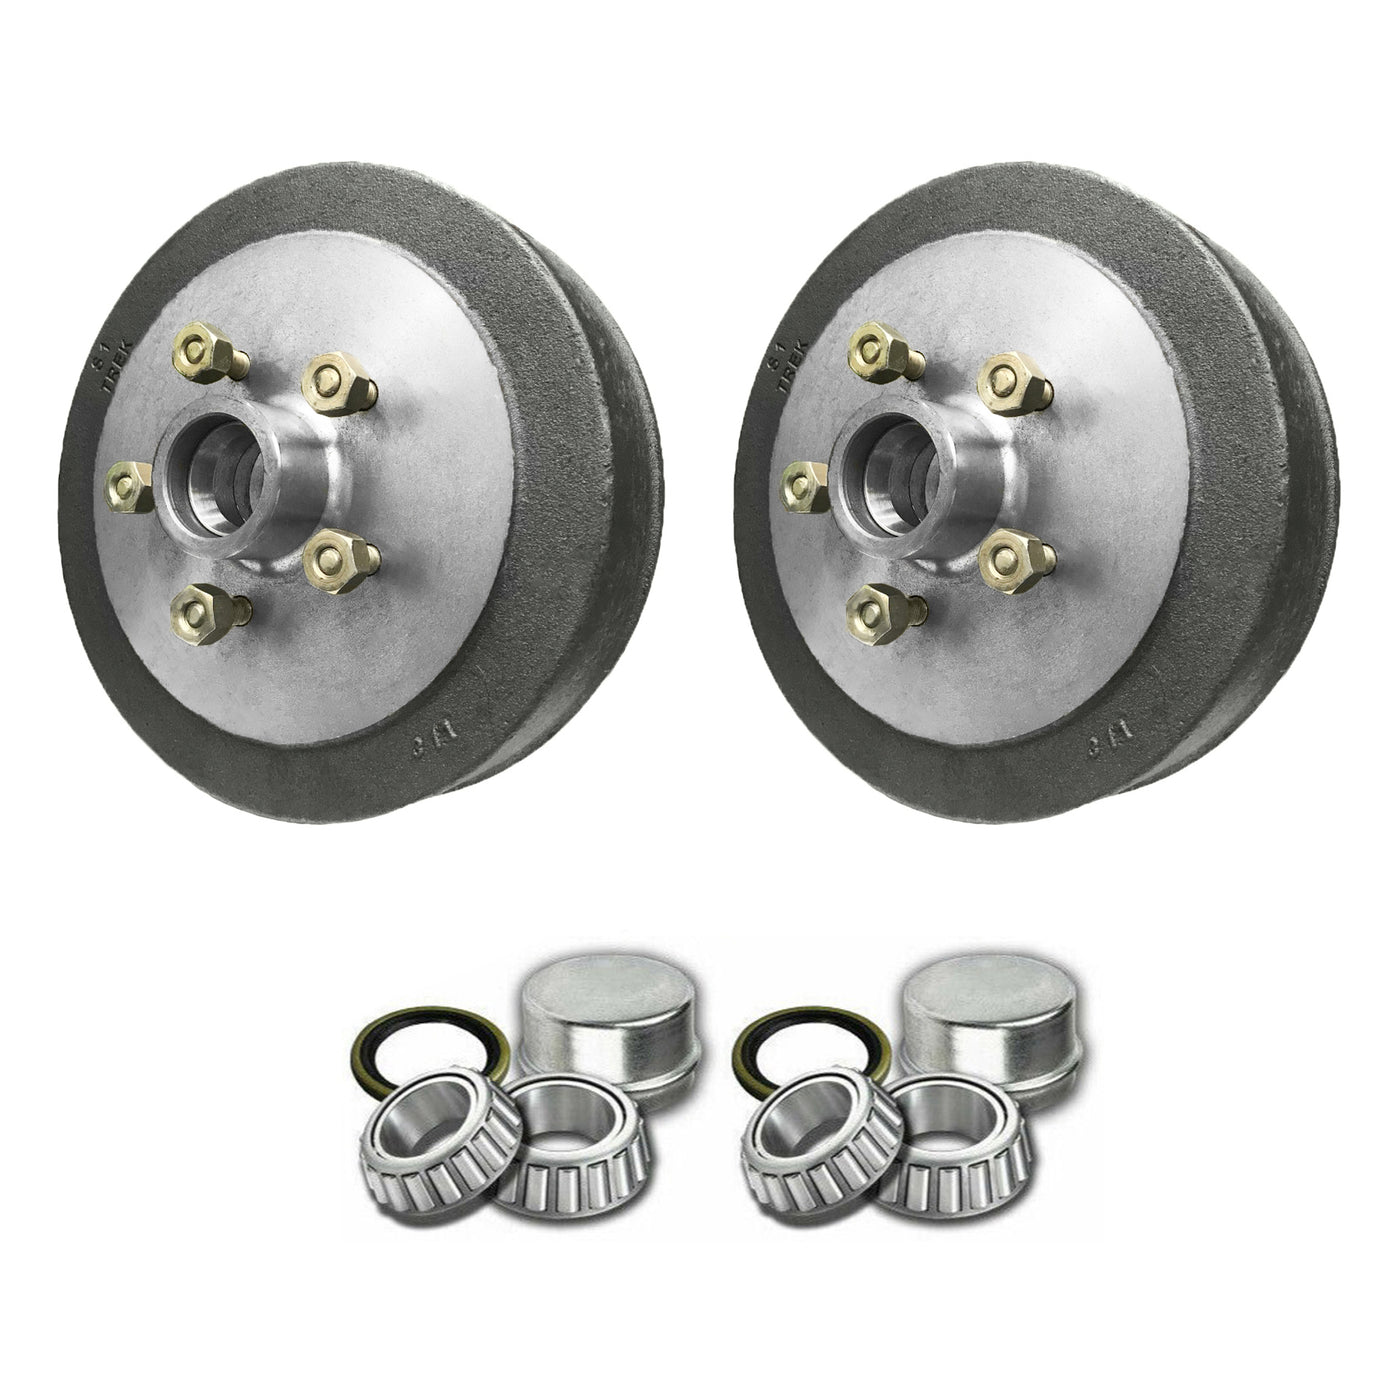 Pair Trailer 10 inch Hub Drum With SL Bearings Suit Electric Hydraulic  Setup Suits HQ Holden